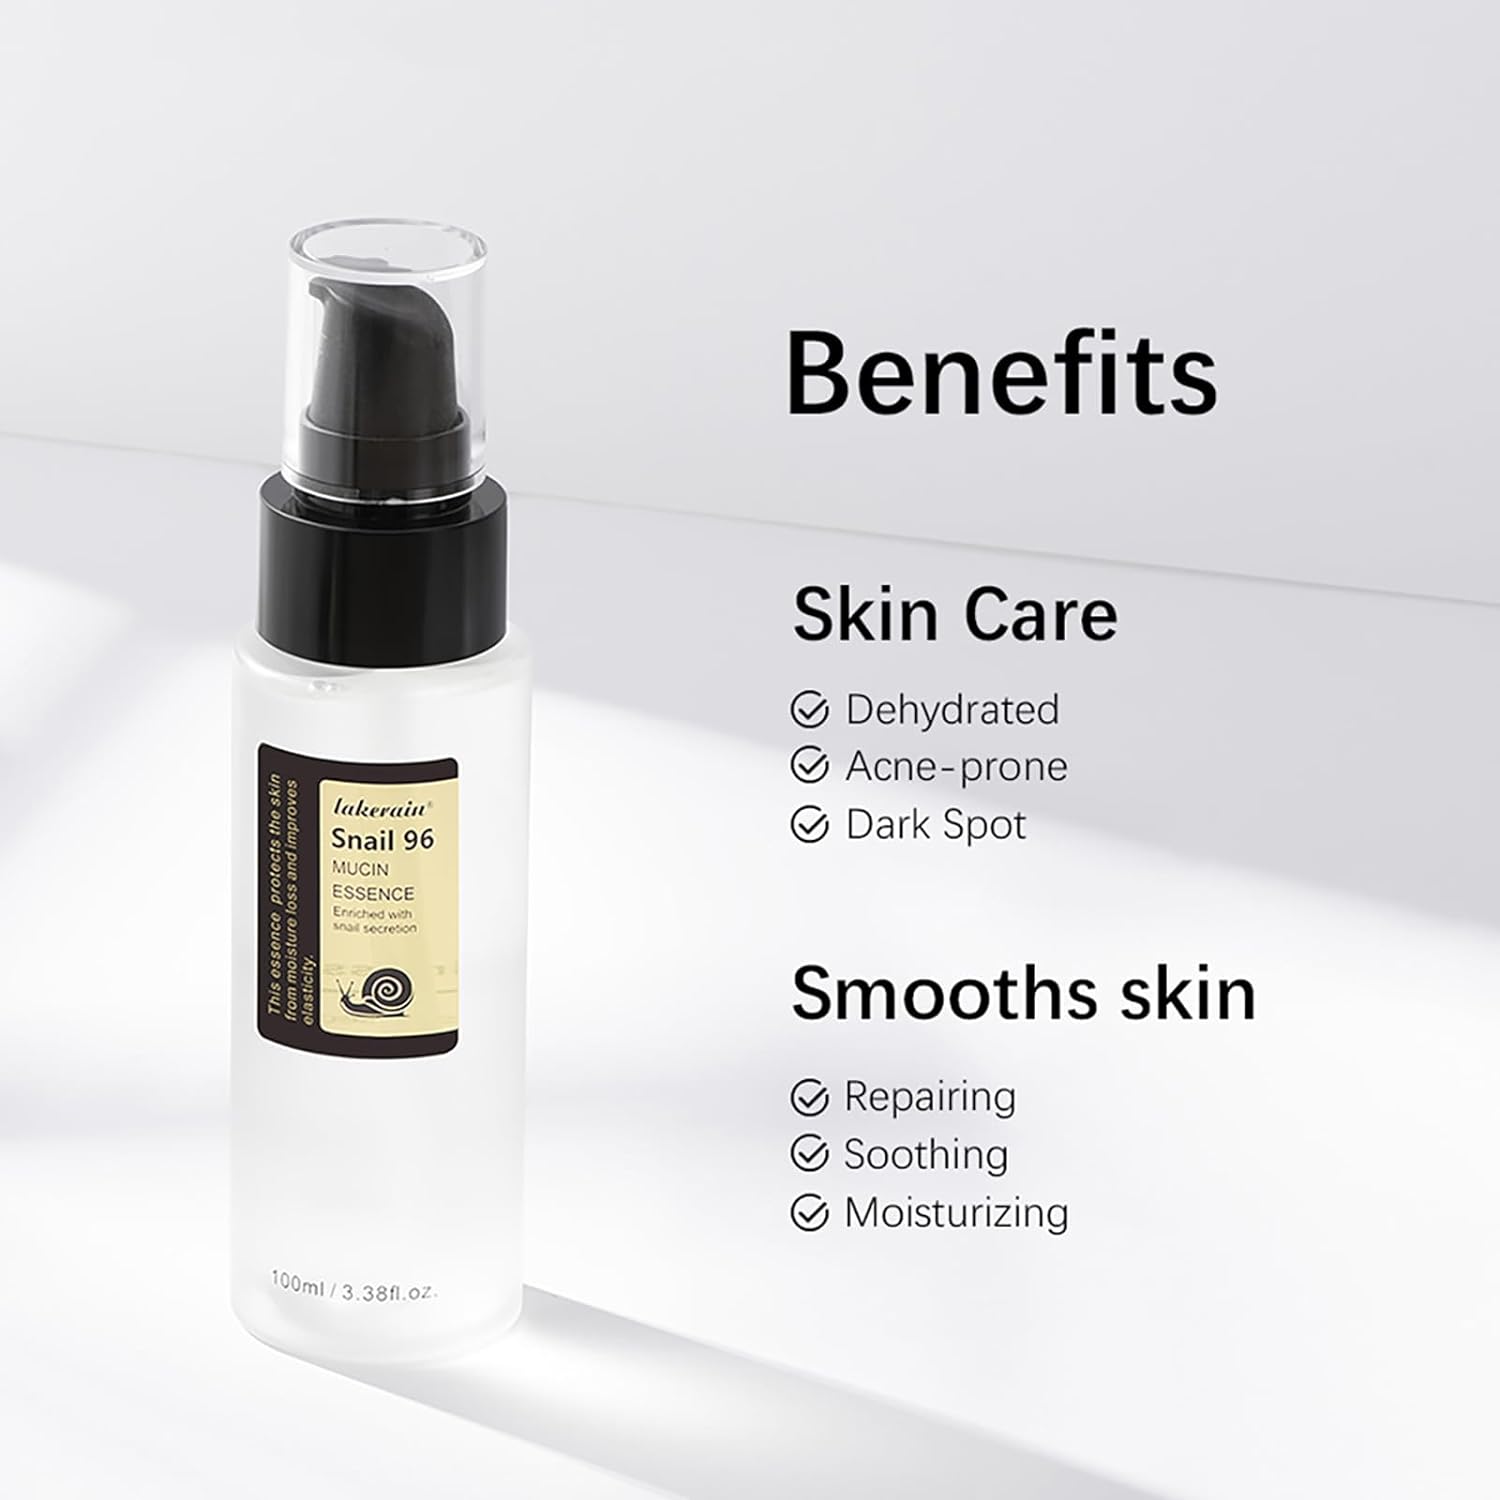 100ml Snail Mucin 96% Power Repairing Essence - Hydrating Serum for Face with Snail Secretion Filtrate for Dull Skin & Fine Lines - Suitable for All Skin Types